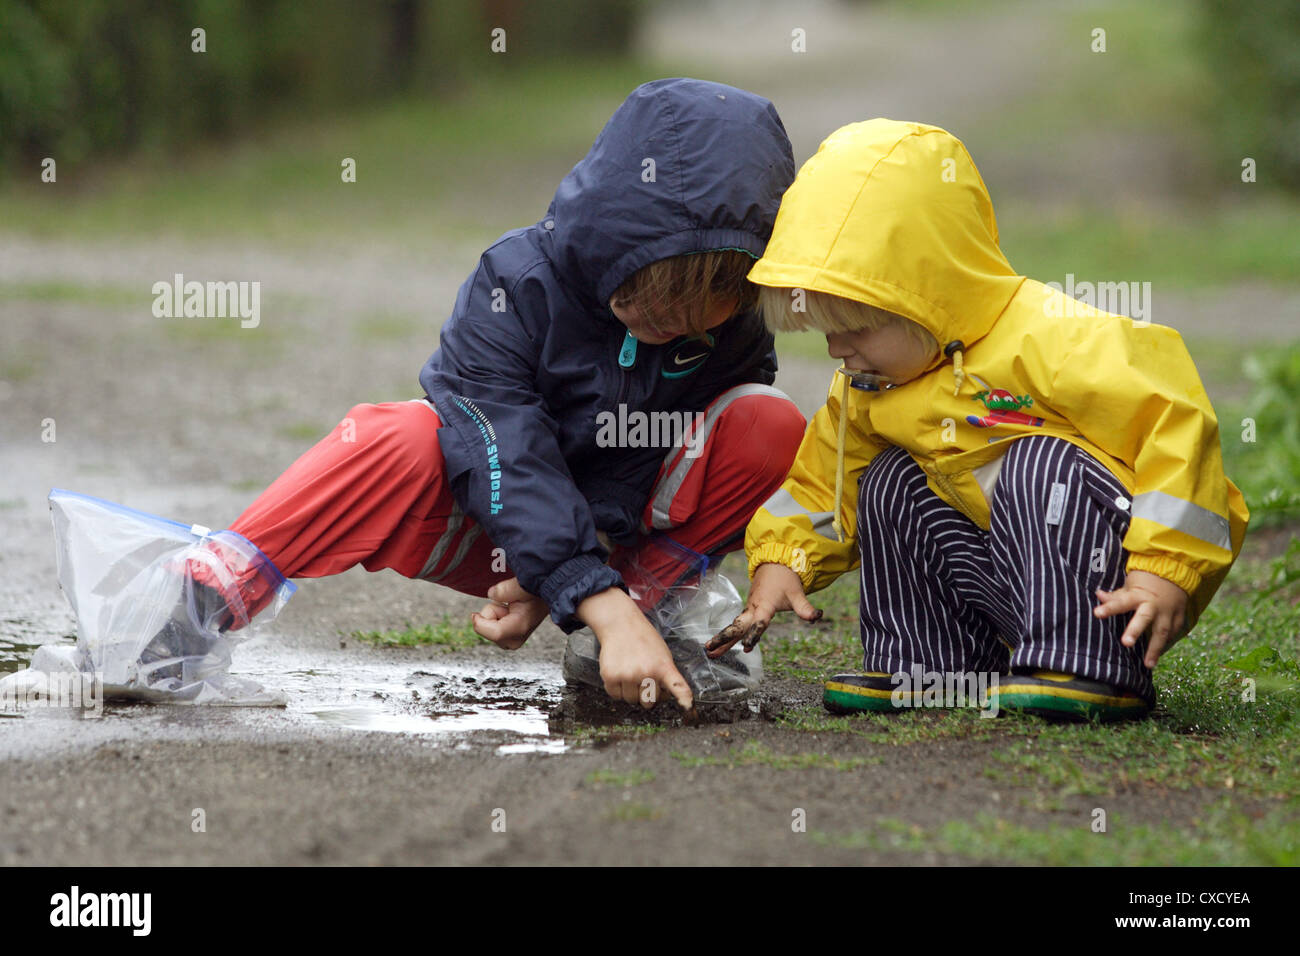 Berlin children playing in rain gear in a puddle Stock Photo